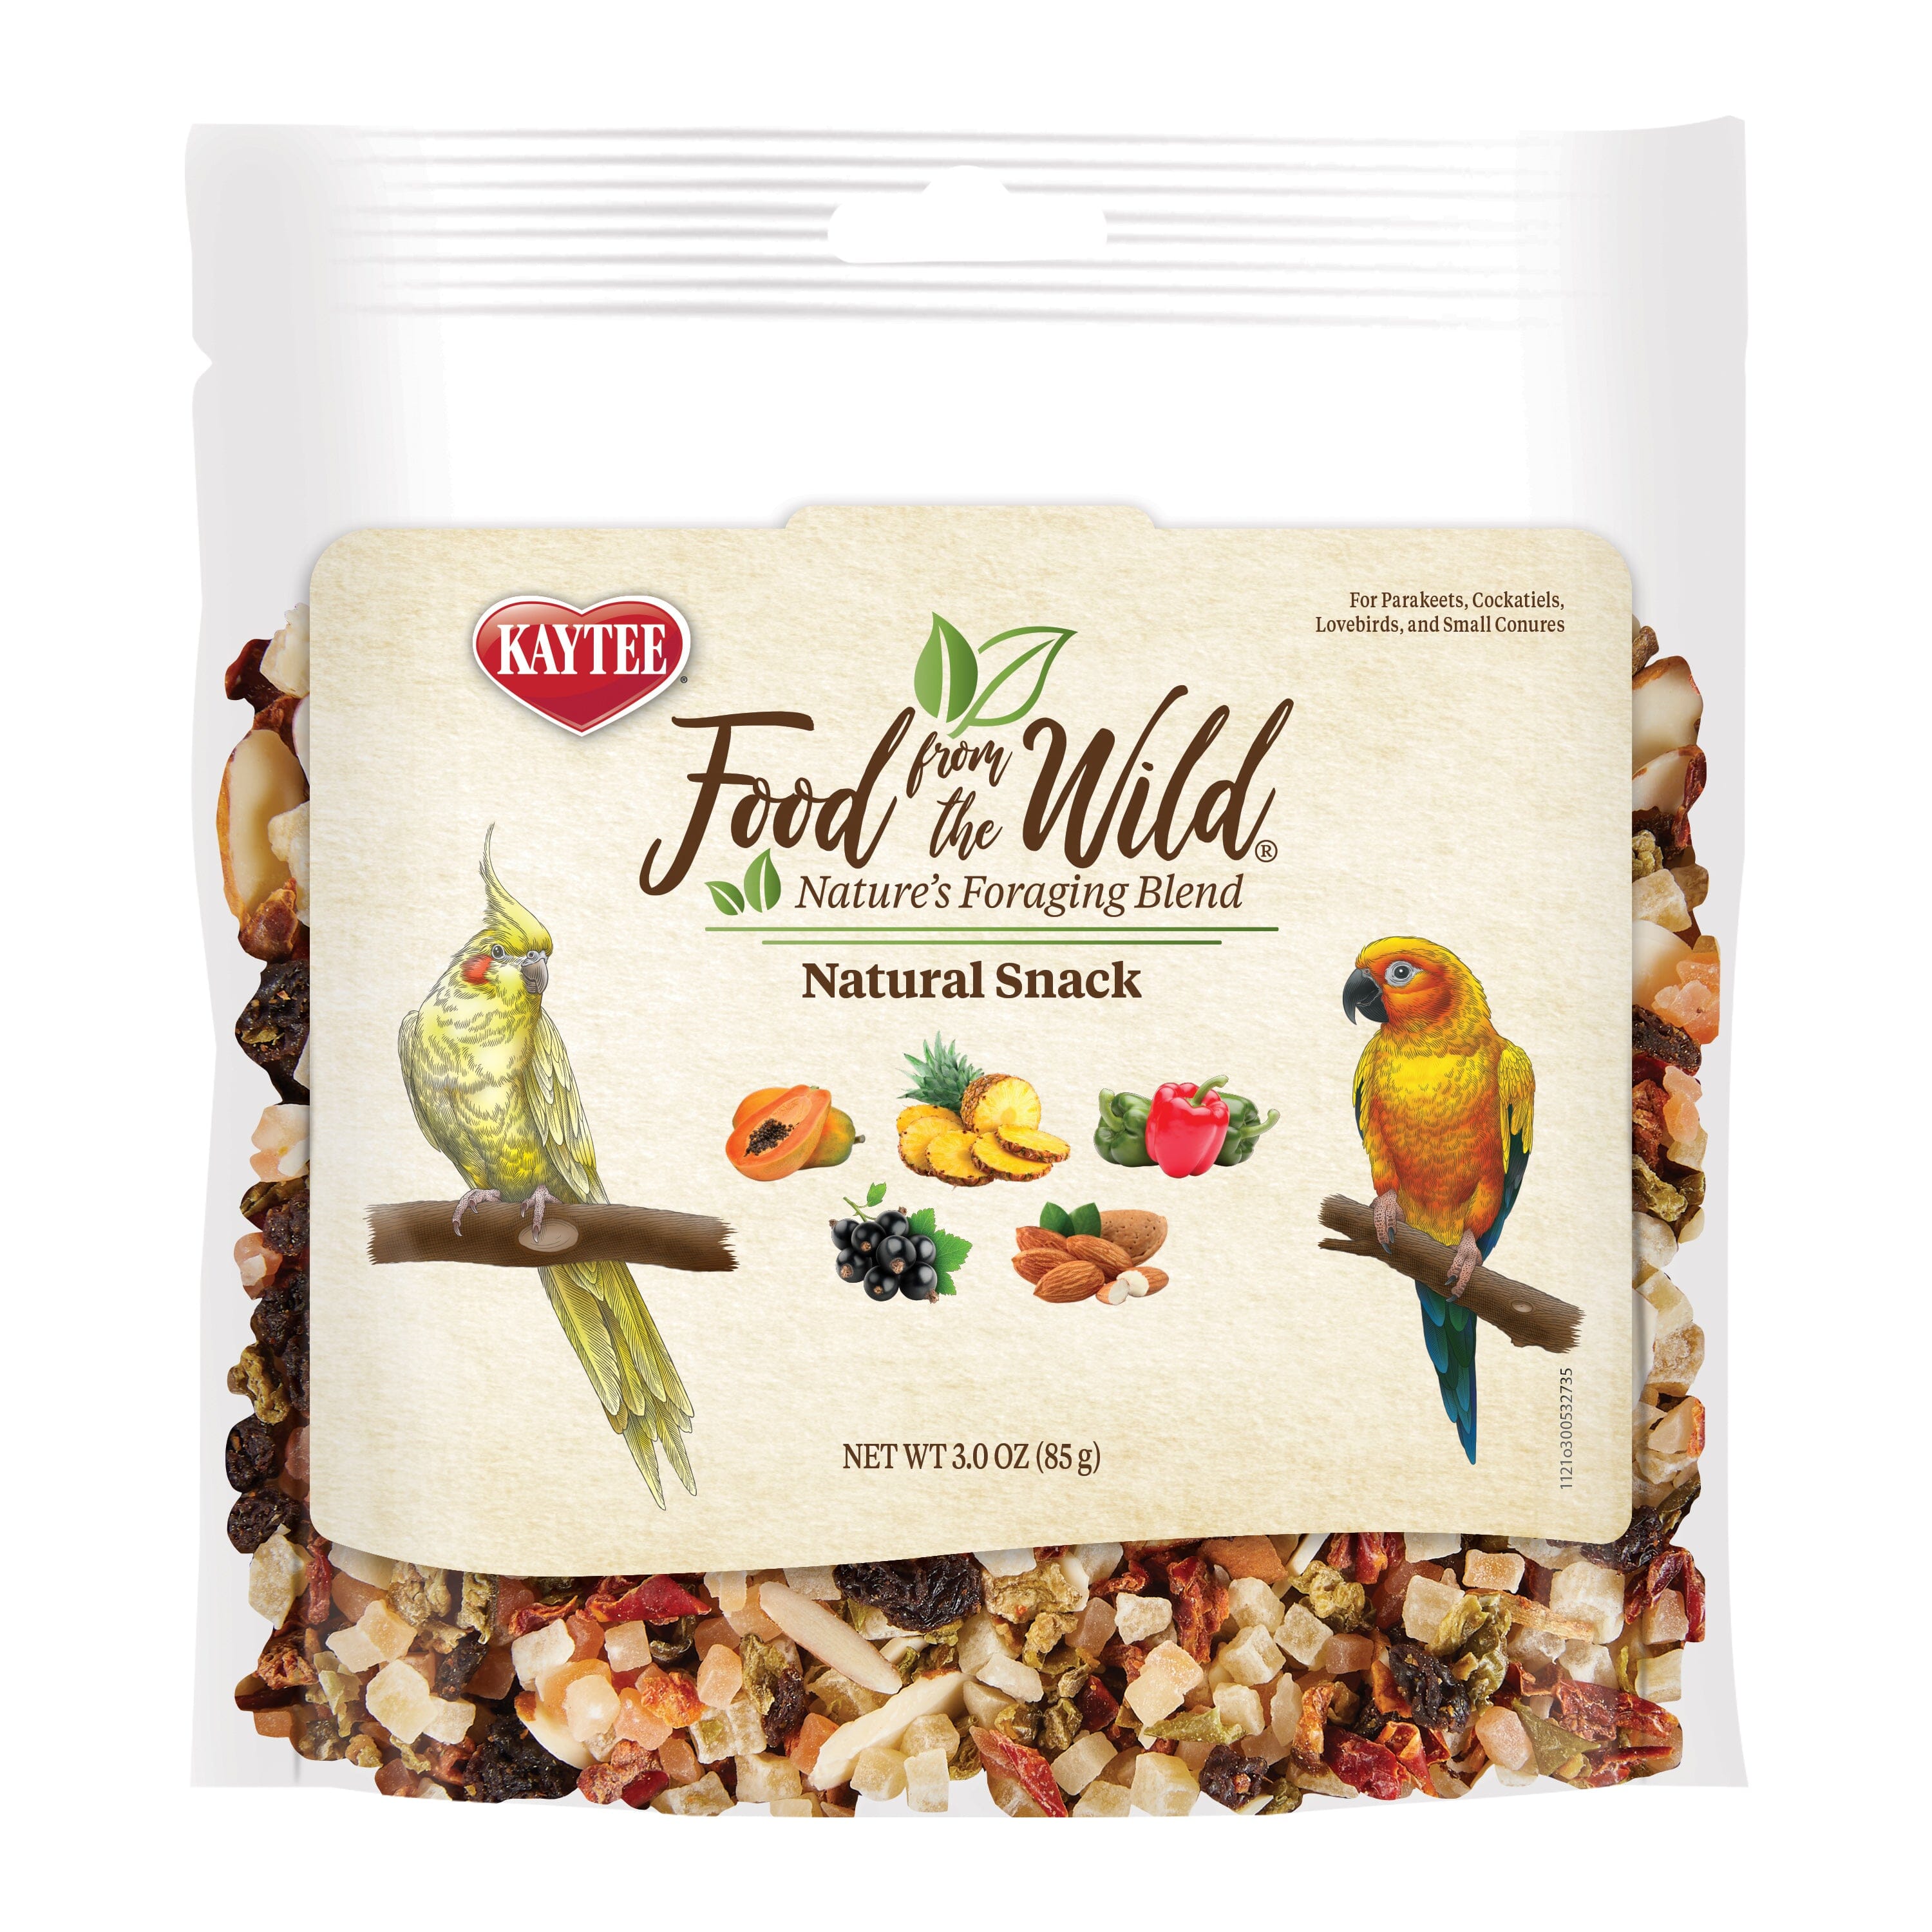 Kaytee Food From the Wild Natural Snack Small Pet Bird - 3 Oz  